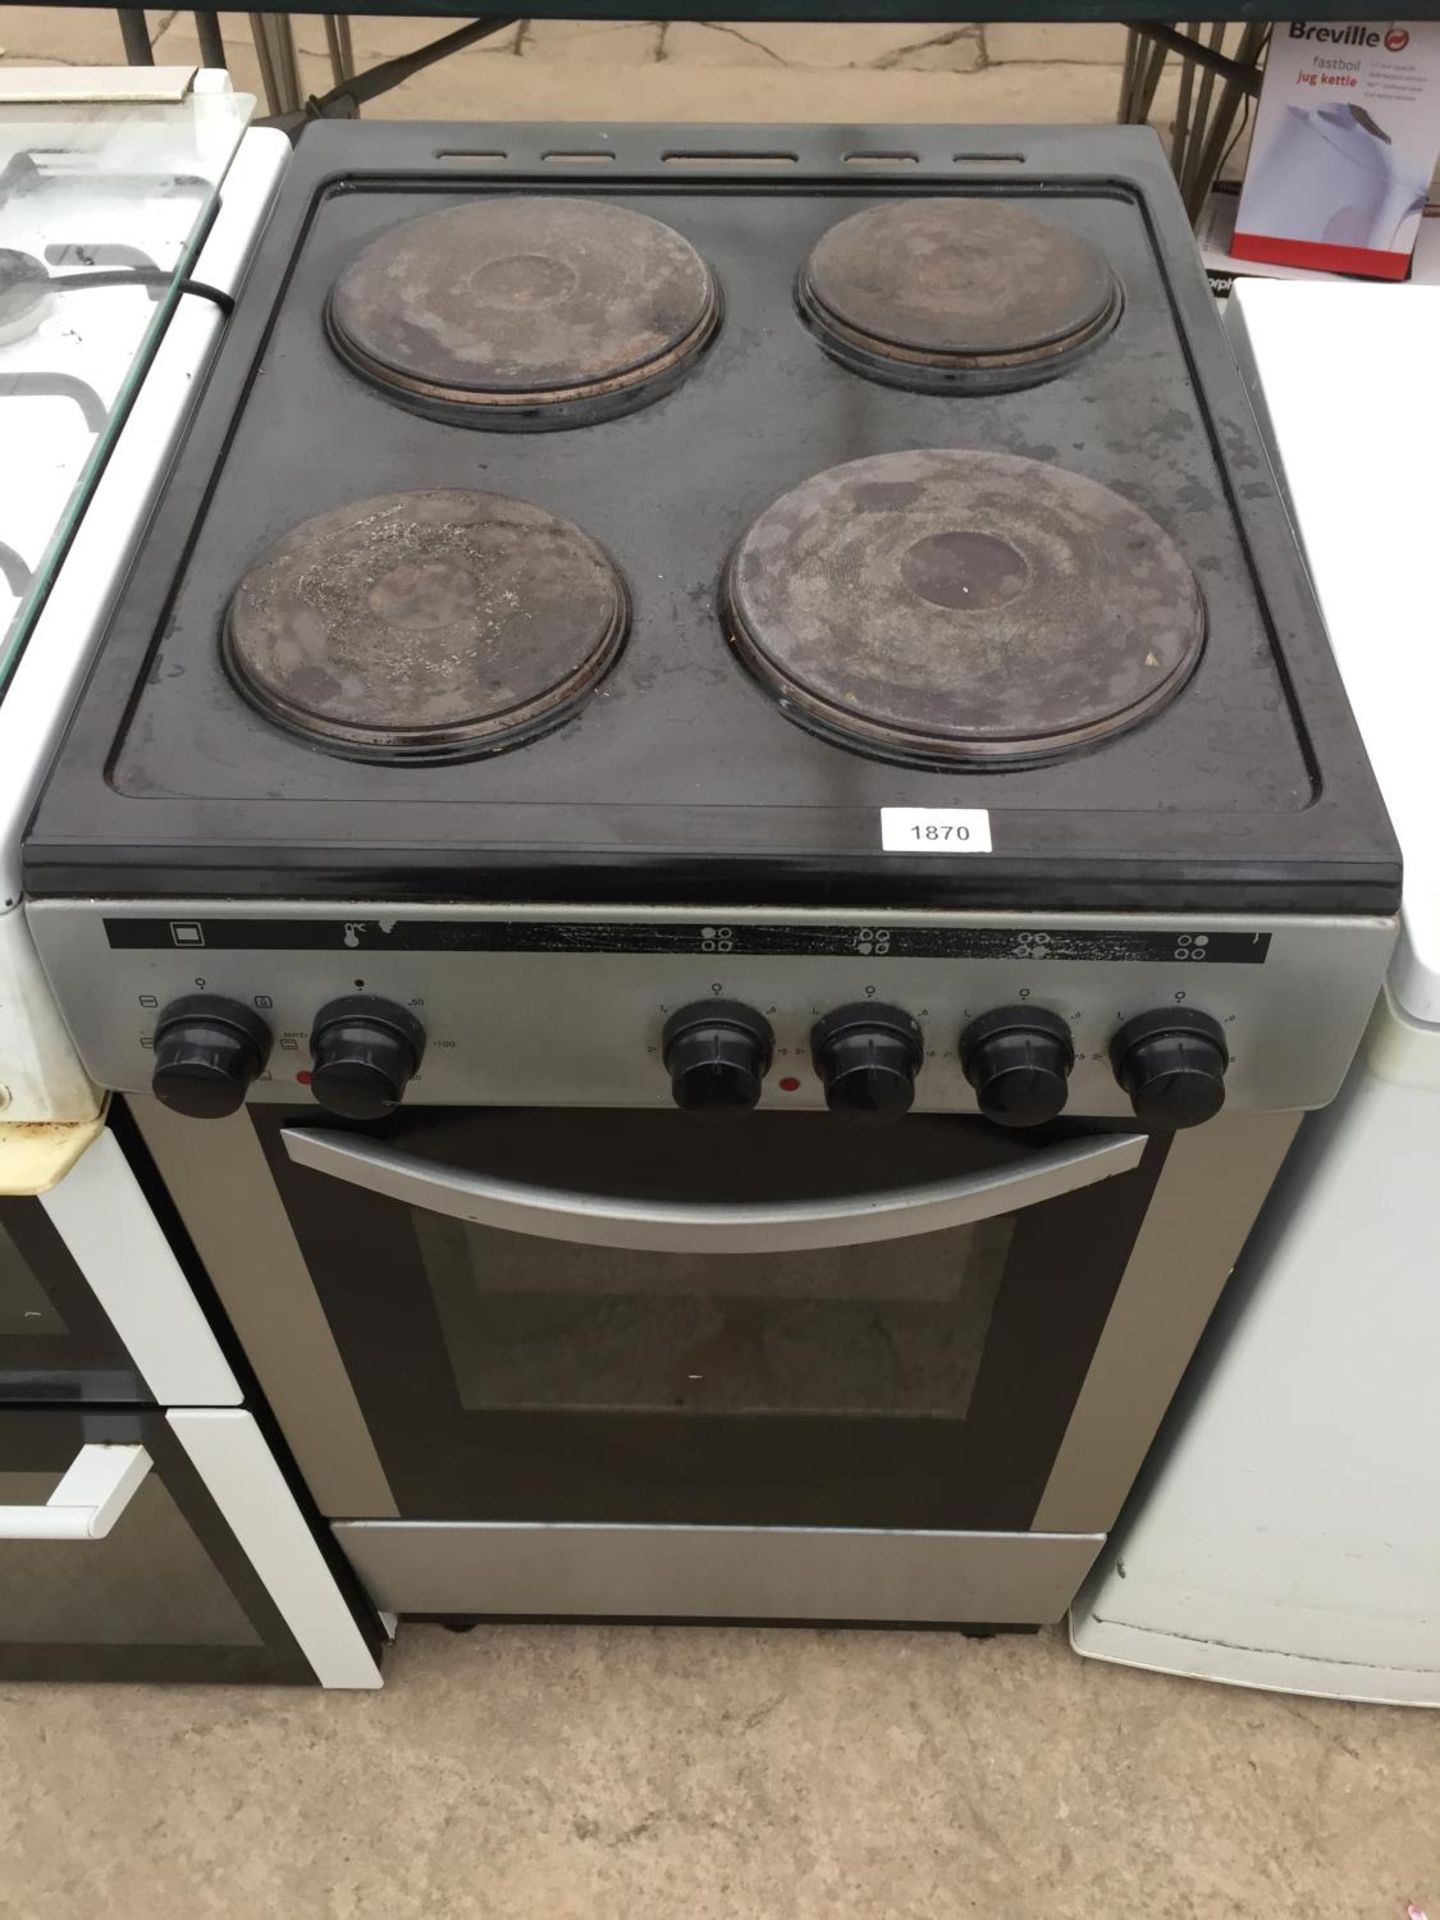 A SILVER AND BLACK FREESTANDING OVEN AND HOB